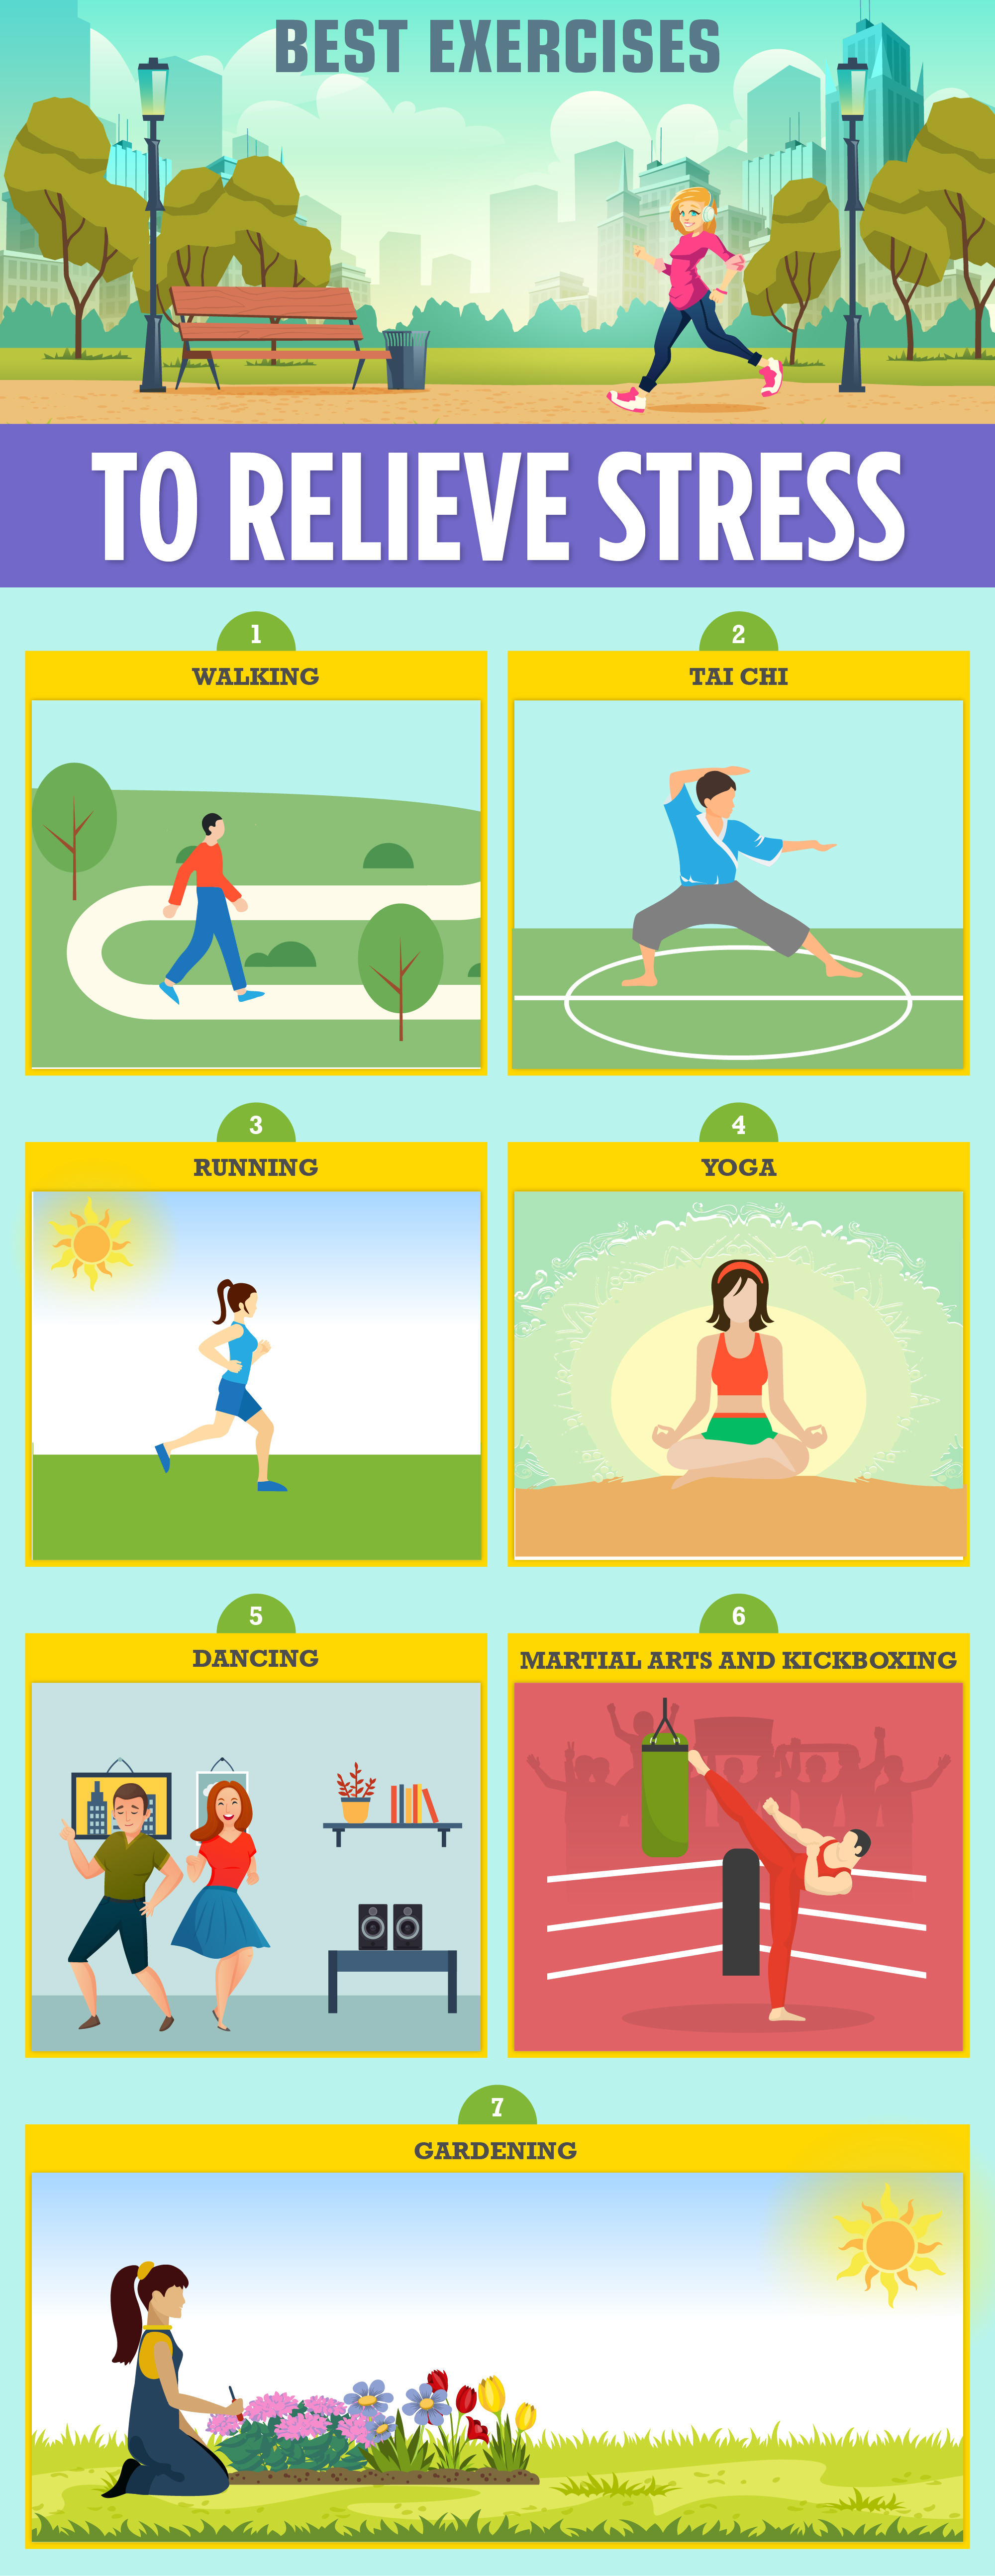 Best Exercises to Relieve Stress